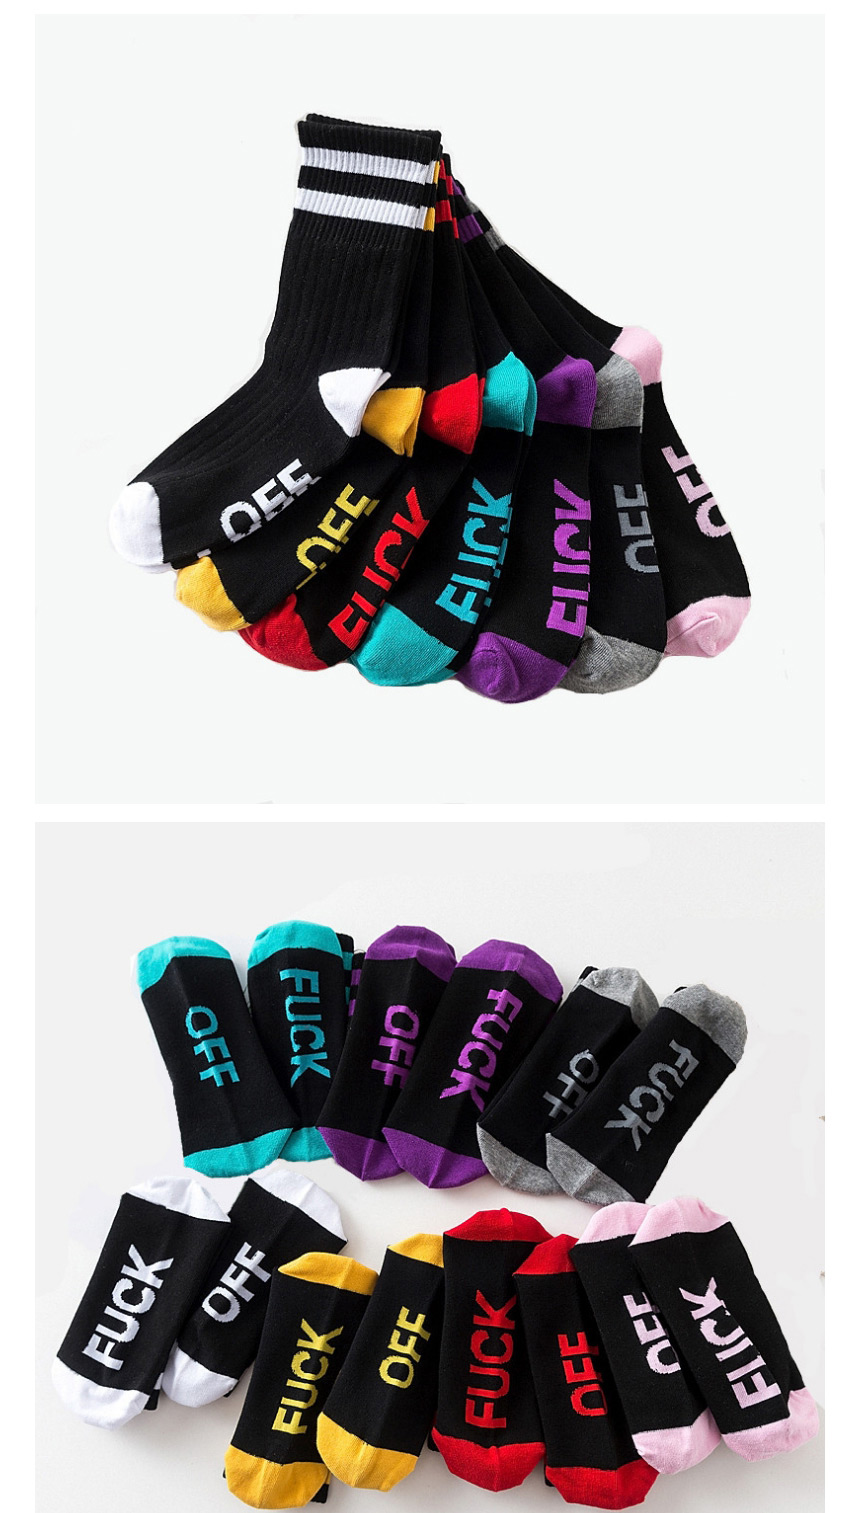 Fashion Black And Red Mens Cotton Socks With Contrasting Letters,Fashion Socks